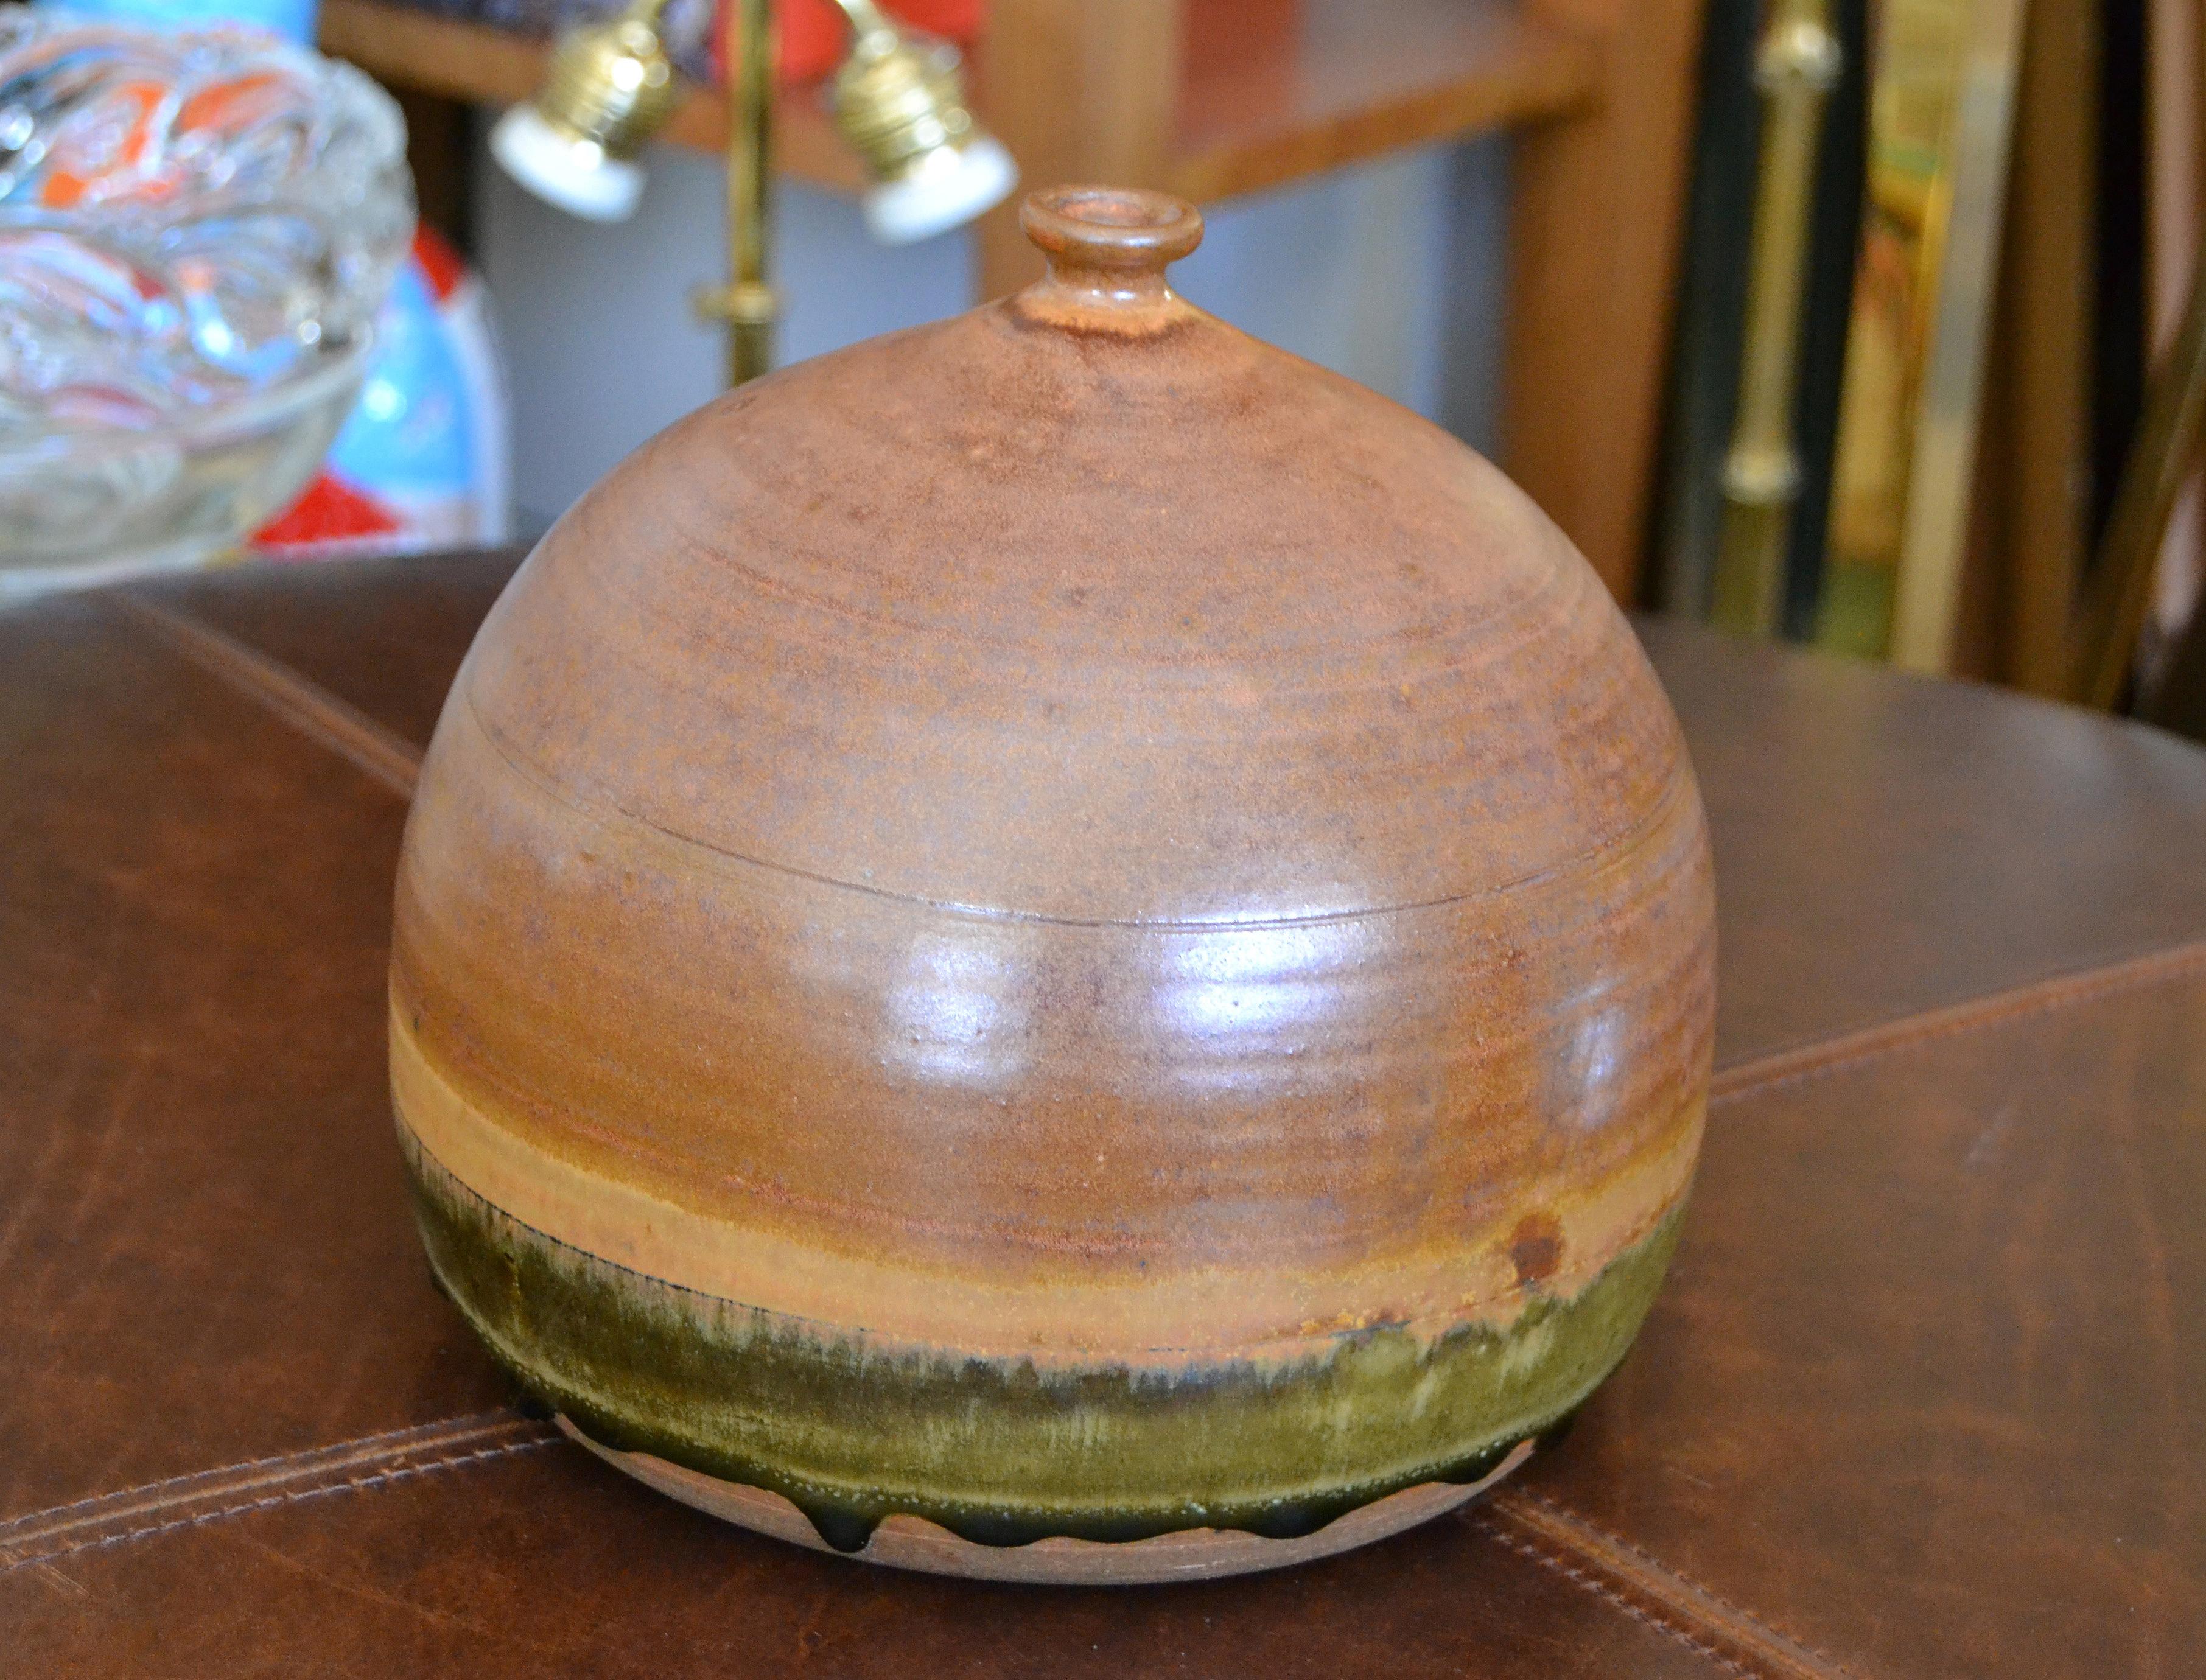 Vintage earthenware handcrafted brown and green terra studio with dark green drip glaze bud or weed vase.
Stamped at the base.
Pottery Art in superb craftsmanship.